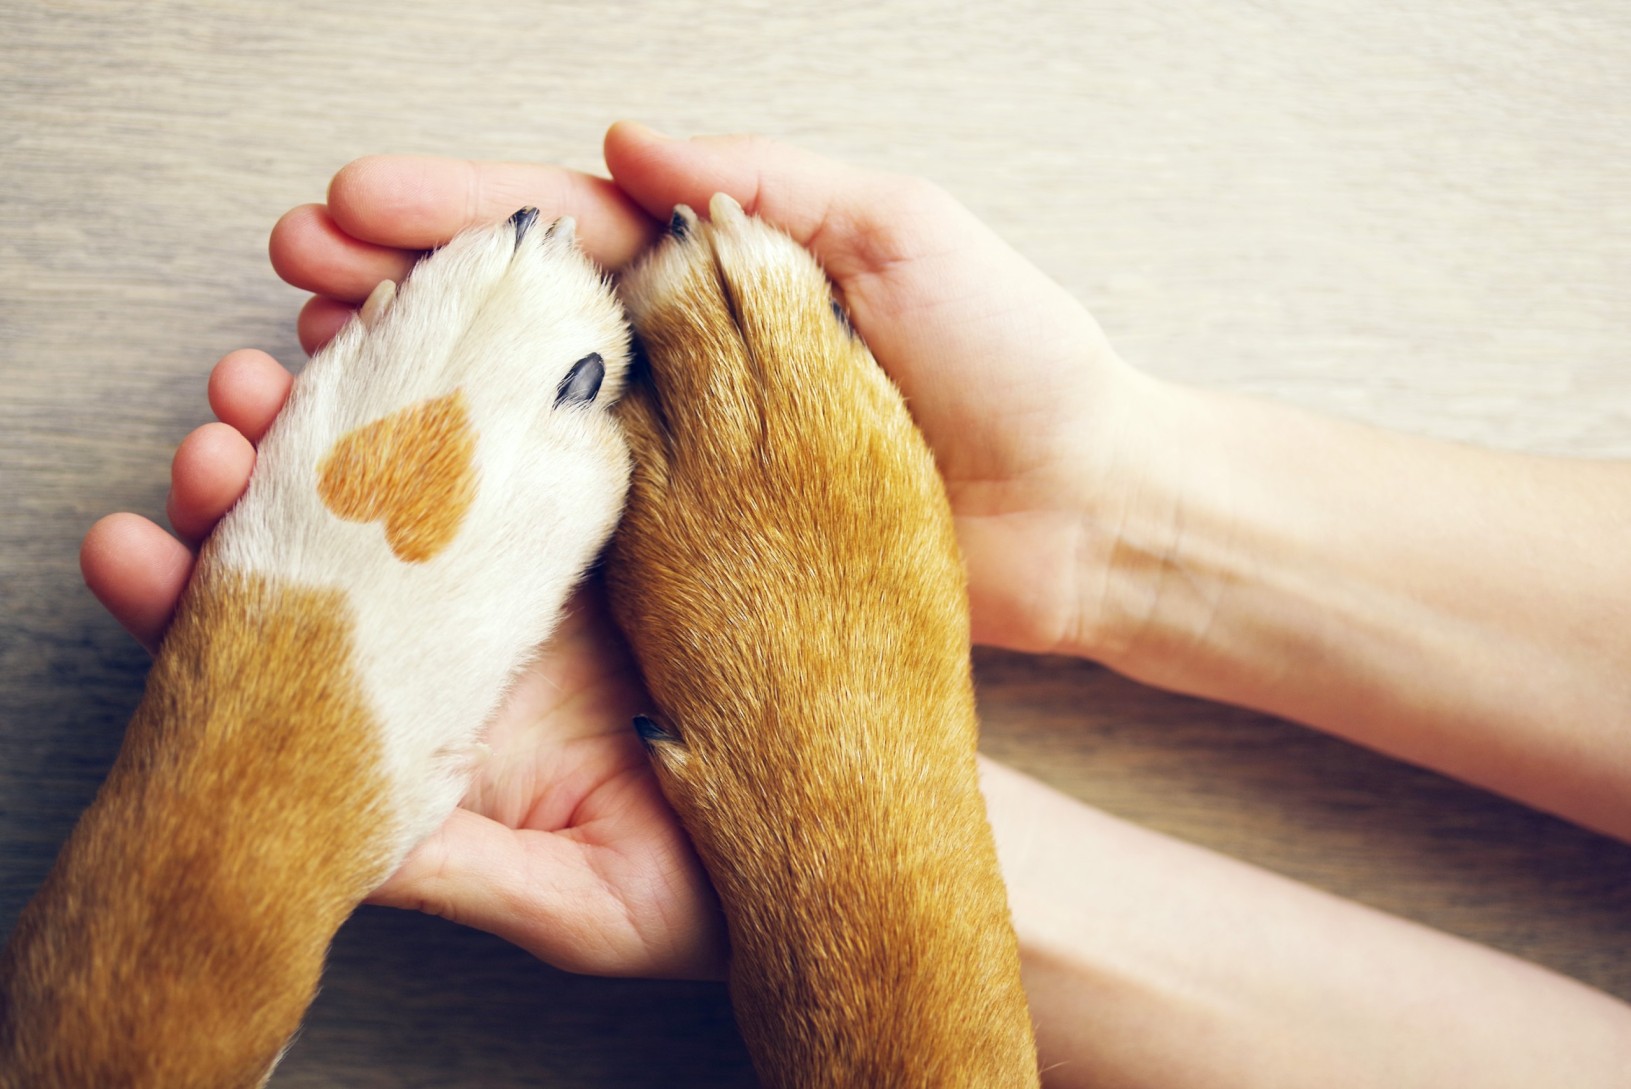 A woman holding a dog's paws in her hands